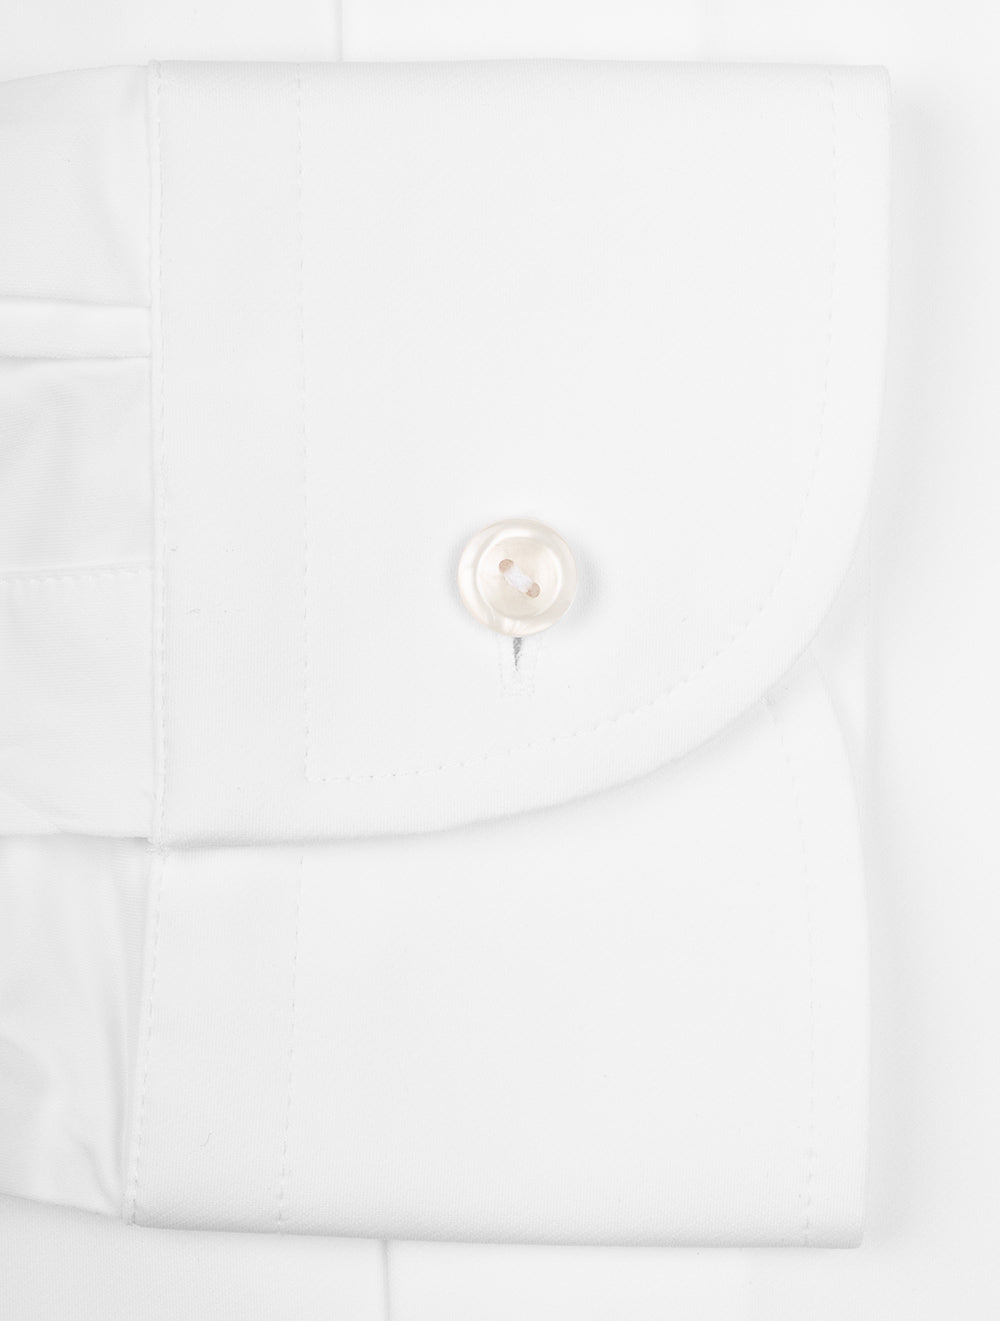 Contemporary Twill Weave 4 Way Stretch Shirt White